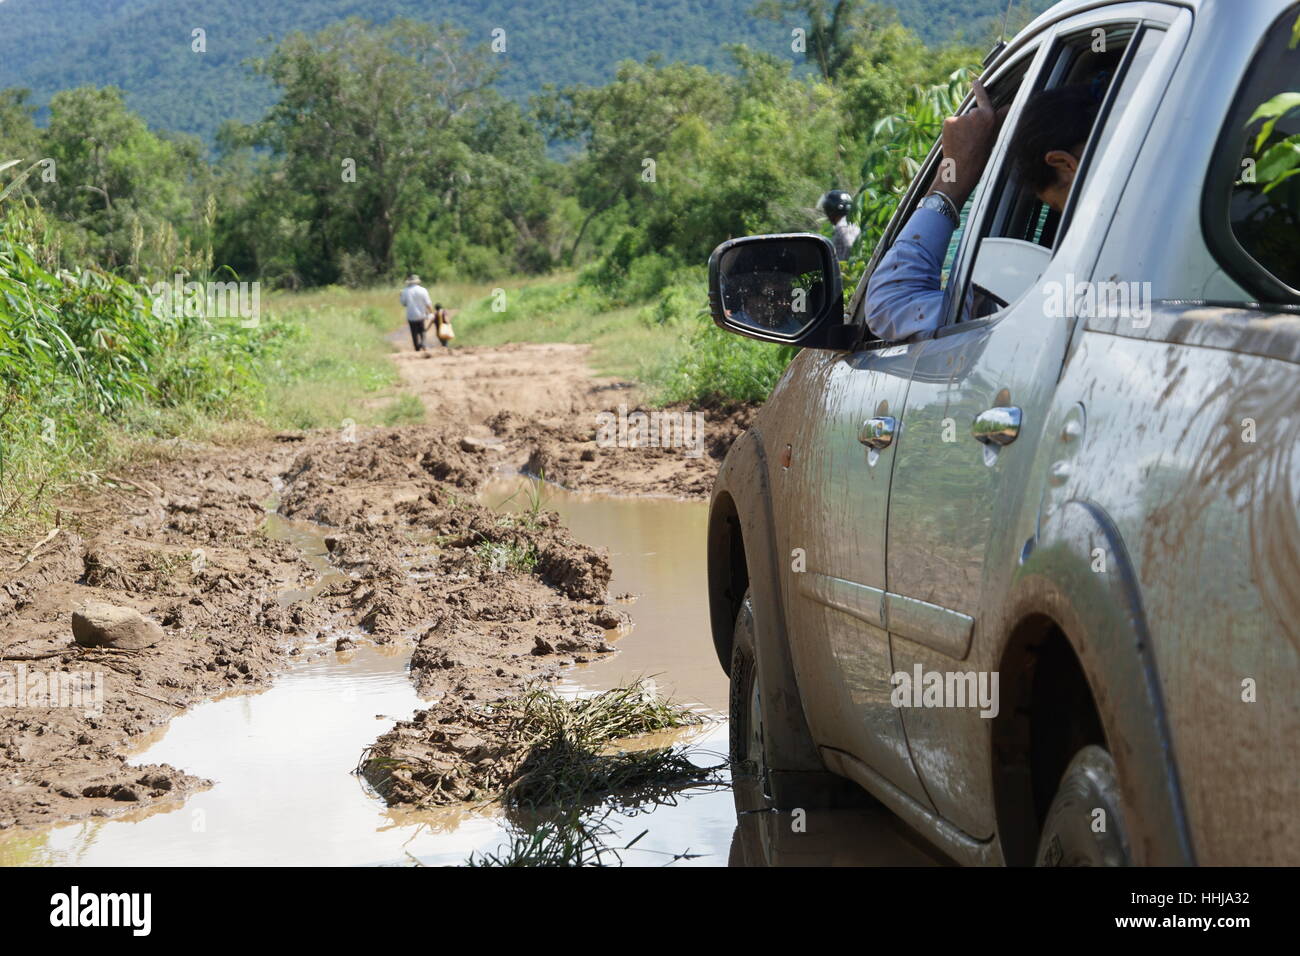 Pickup / Car Stuck in the Mud in Remote Cambodia (Samlout, Battambang) with 2 People in the Distance Stock Photo